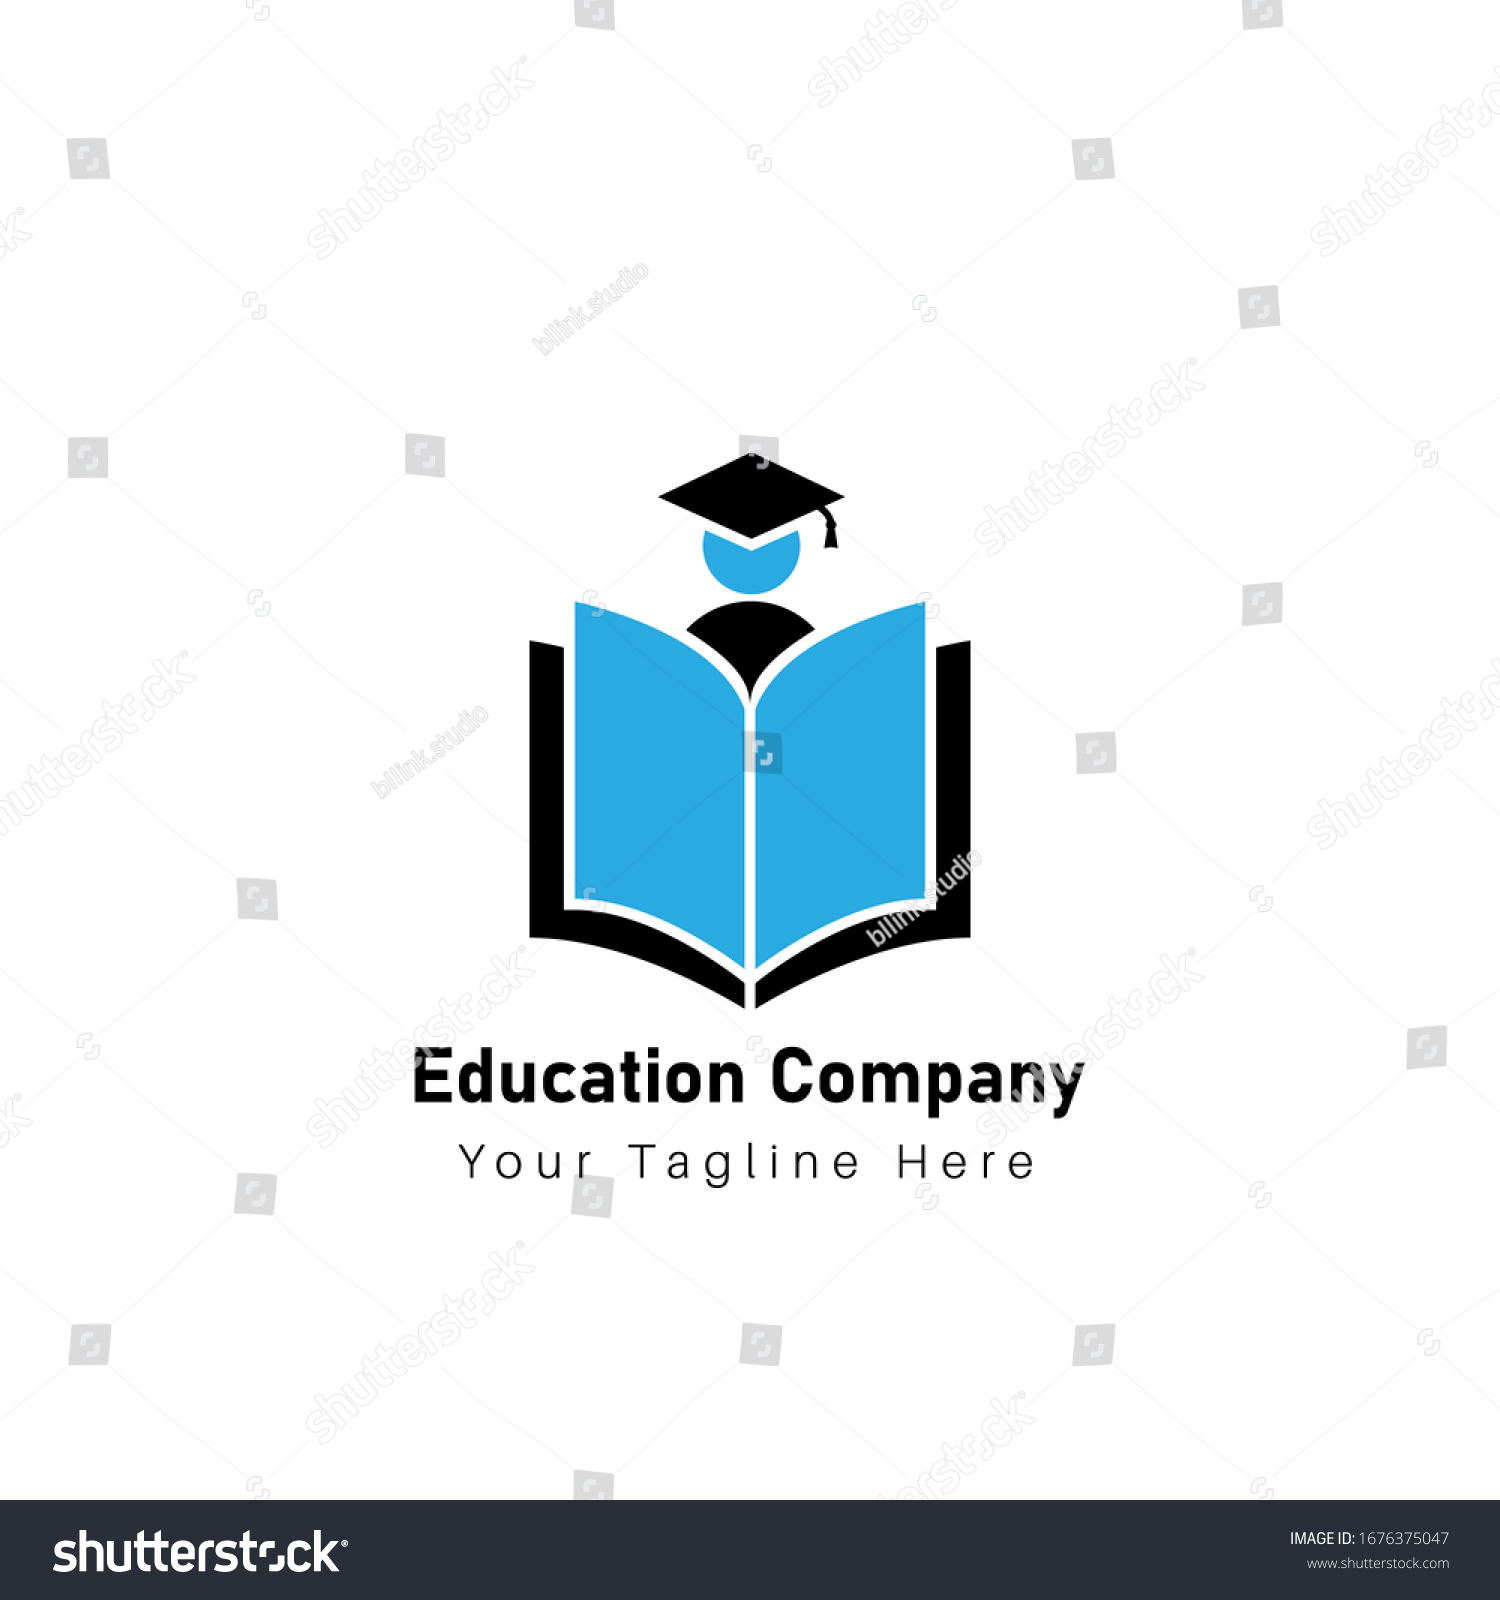 Youth Education Template Logo Library School Stock Vector (Royalty Free ...